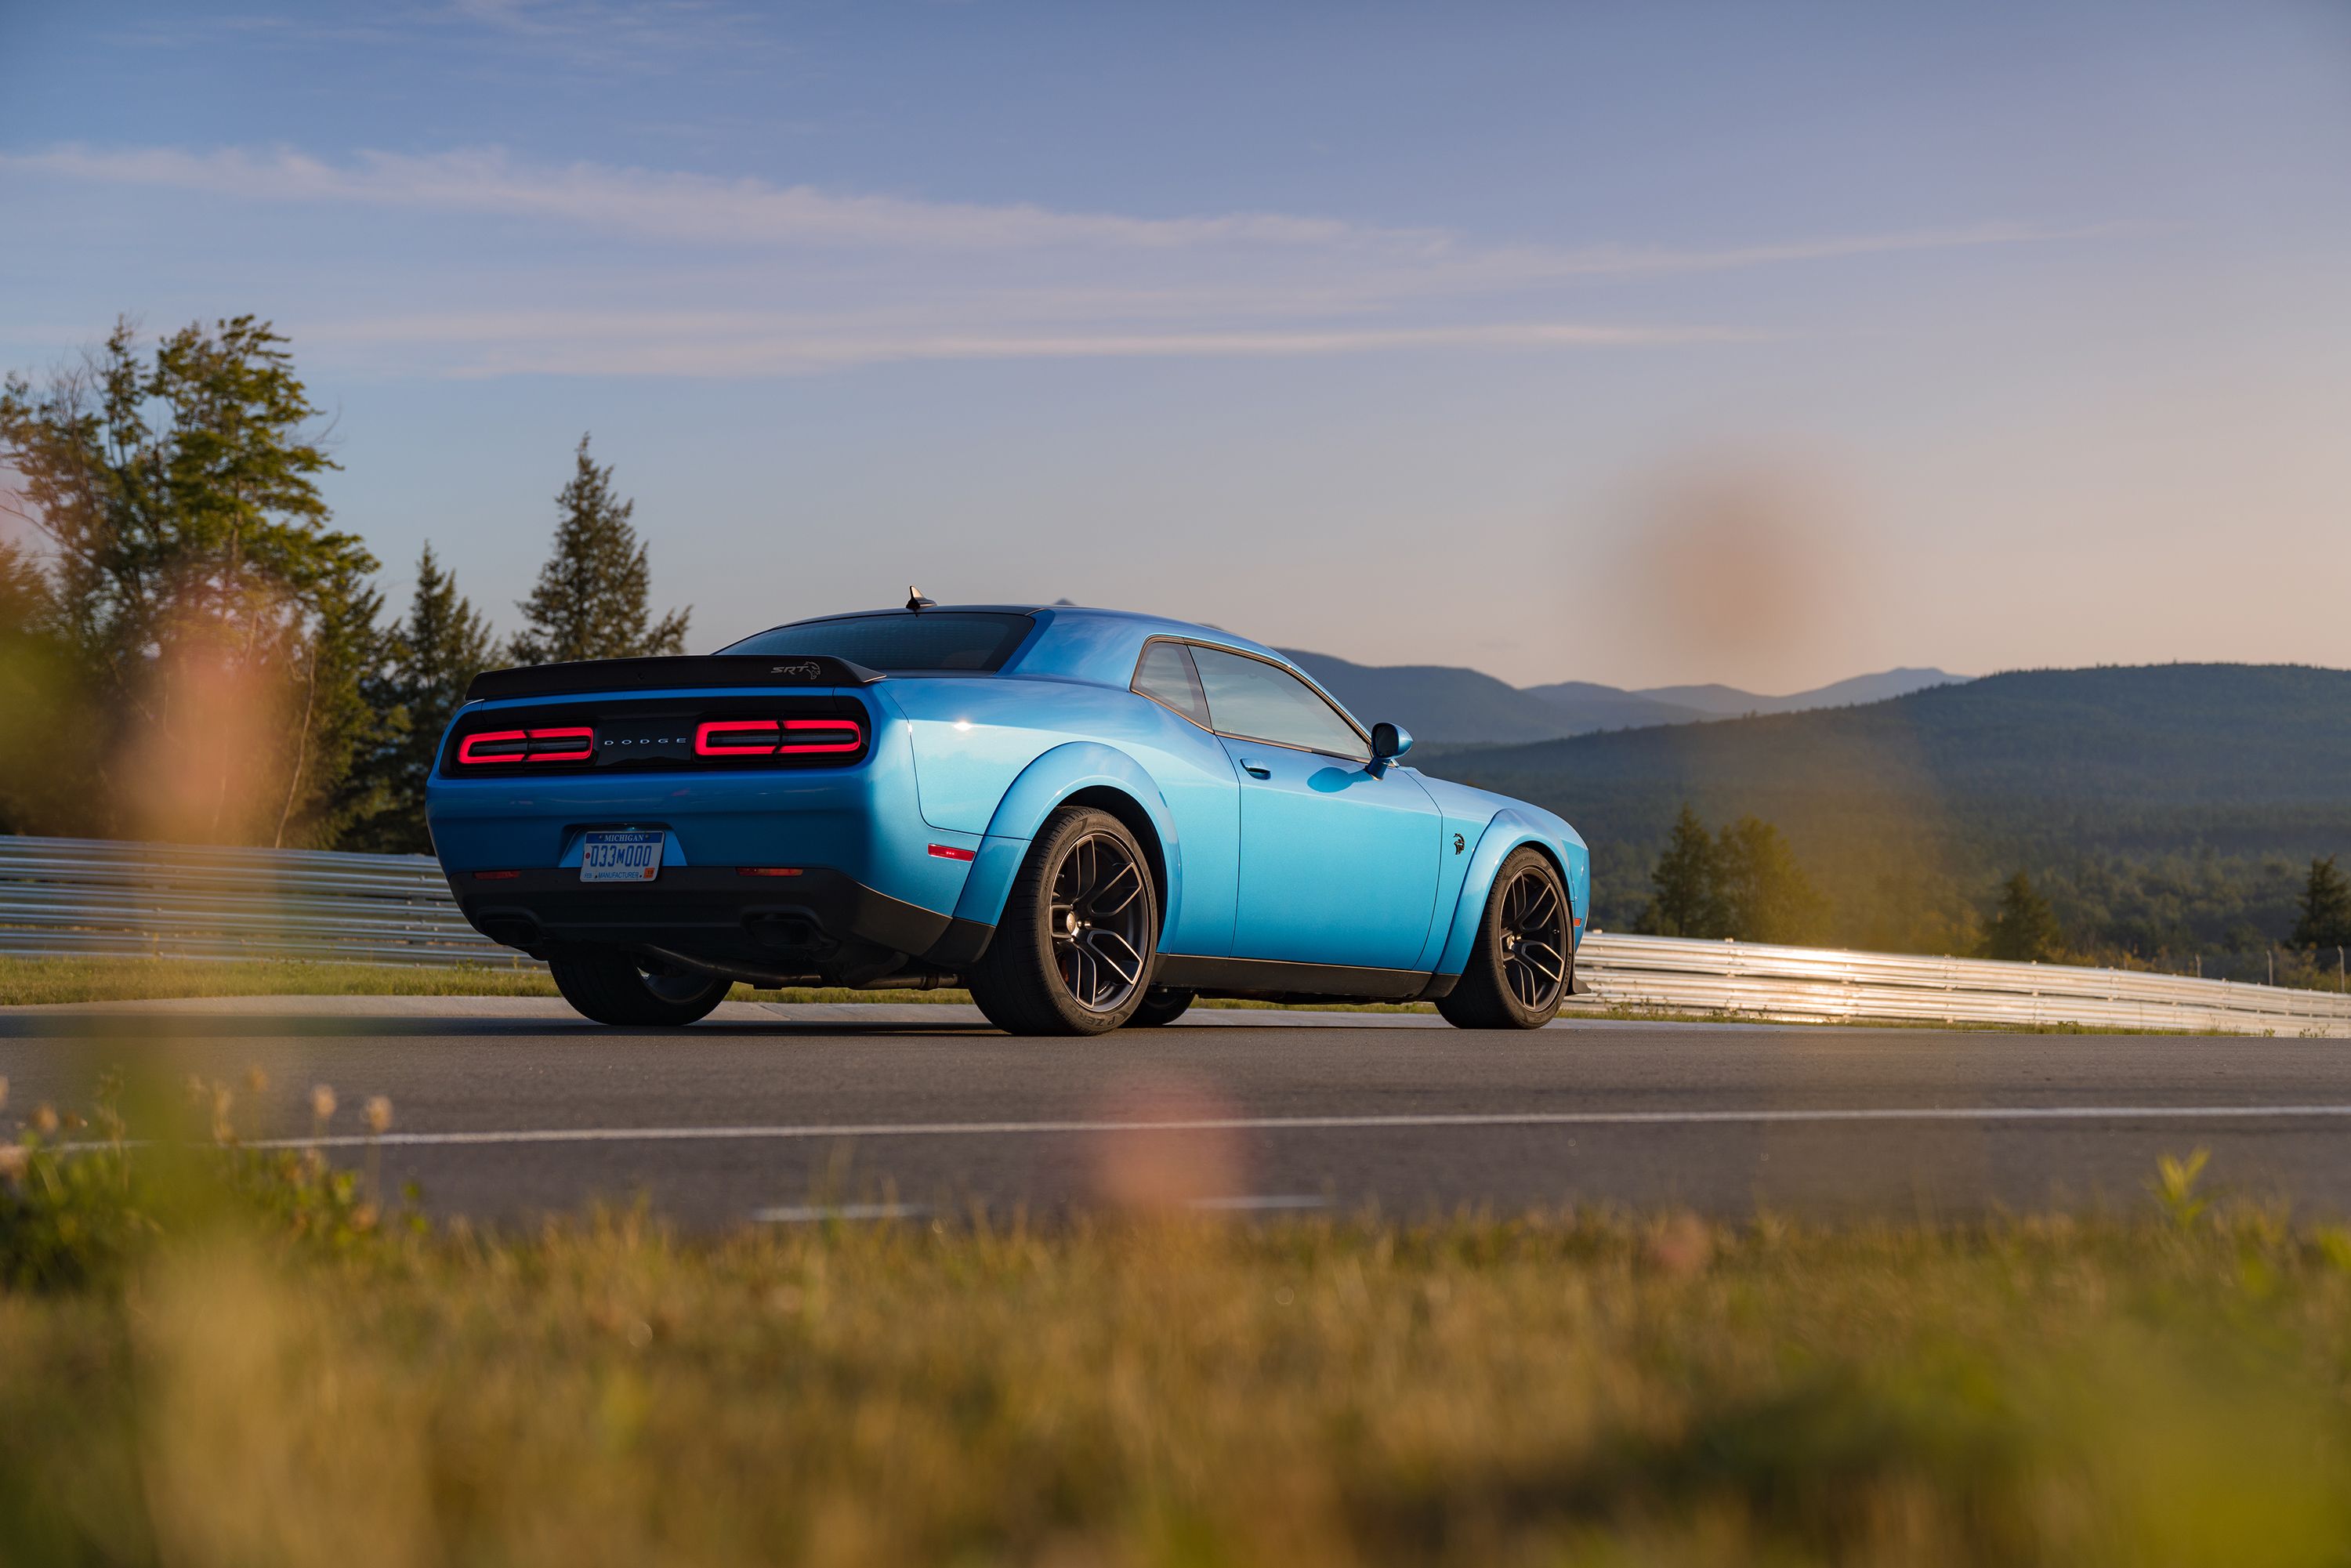 2020 Dodge Challenger Hellcat Redeye Review: Expectations Fulfilled